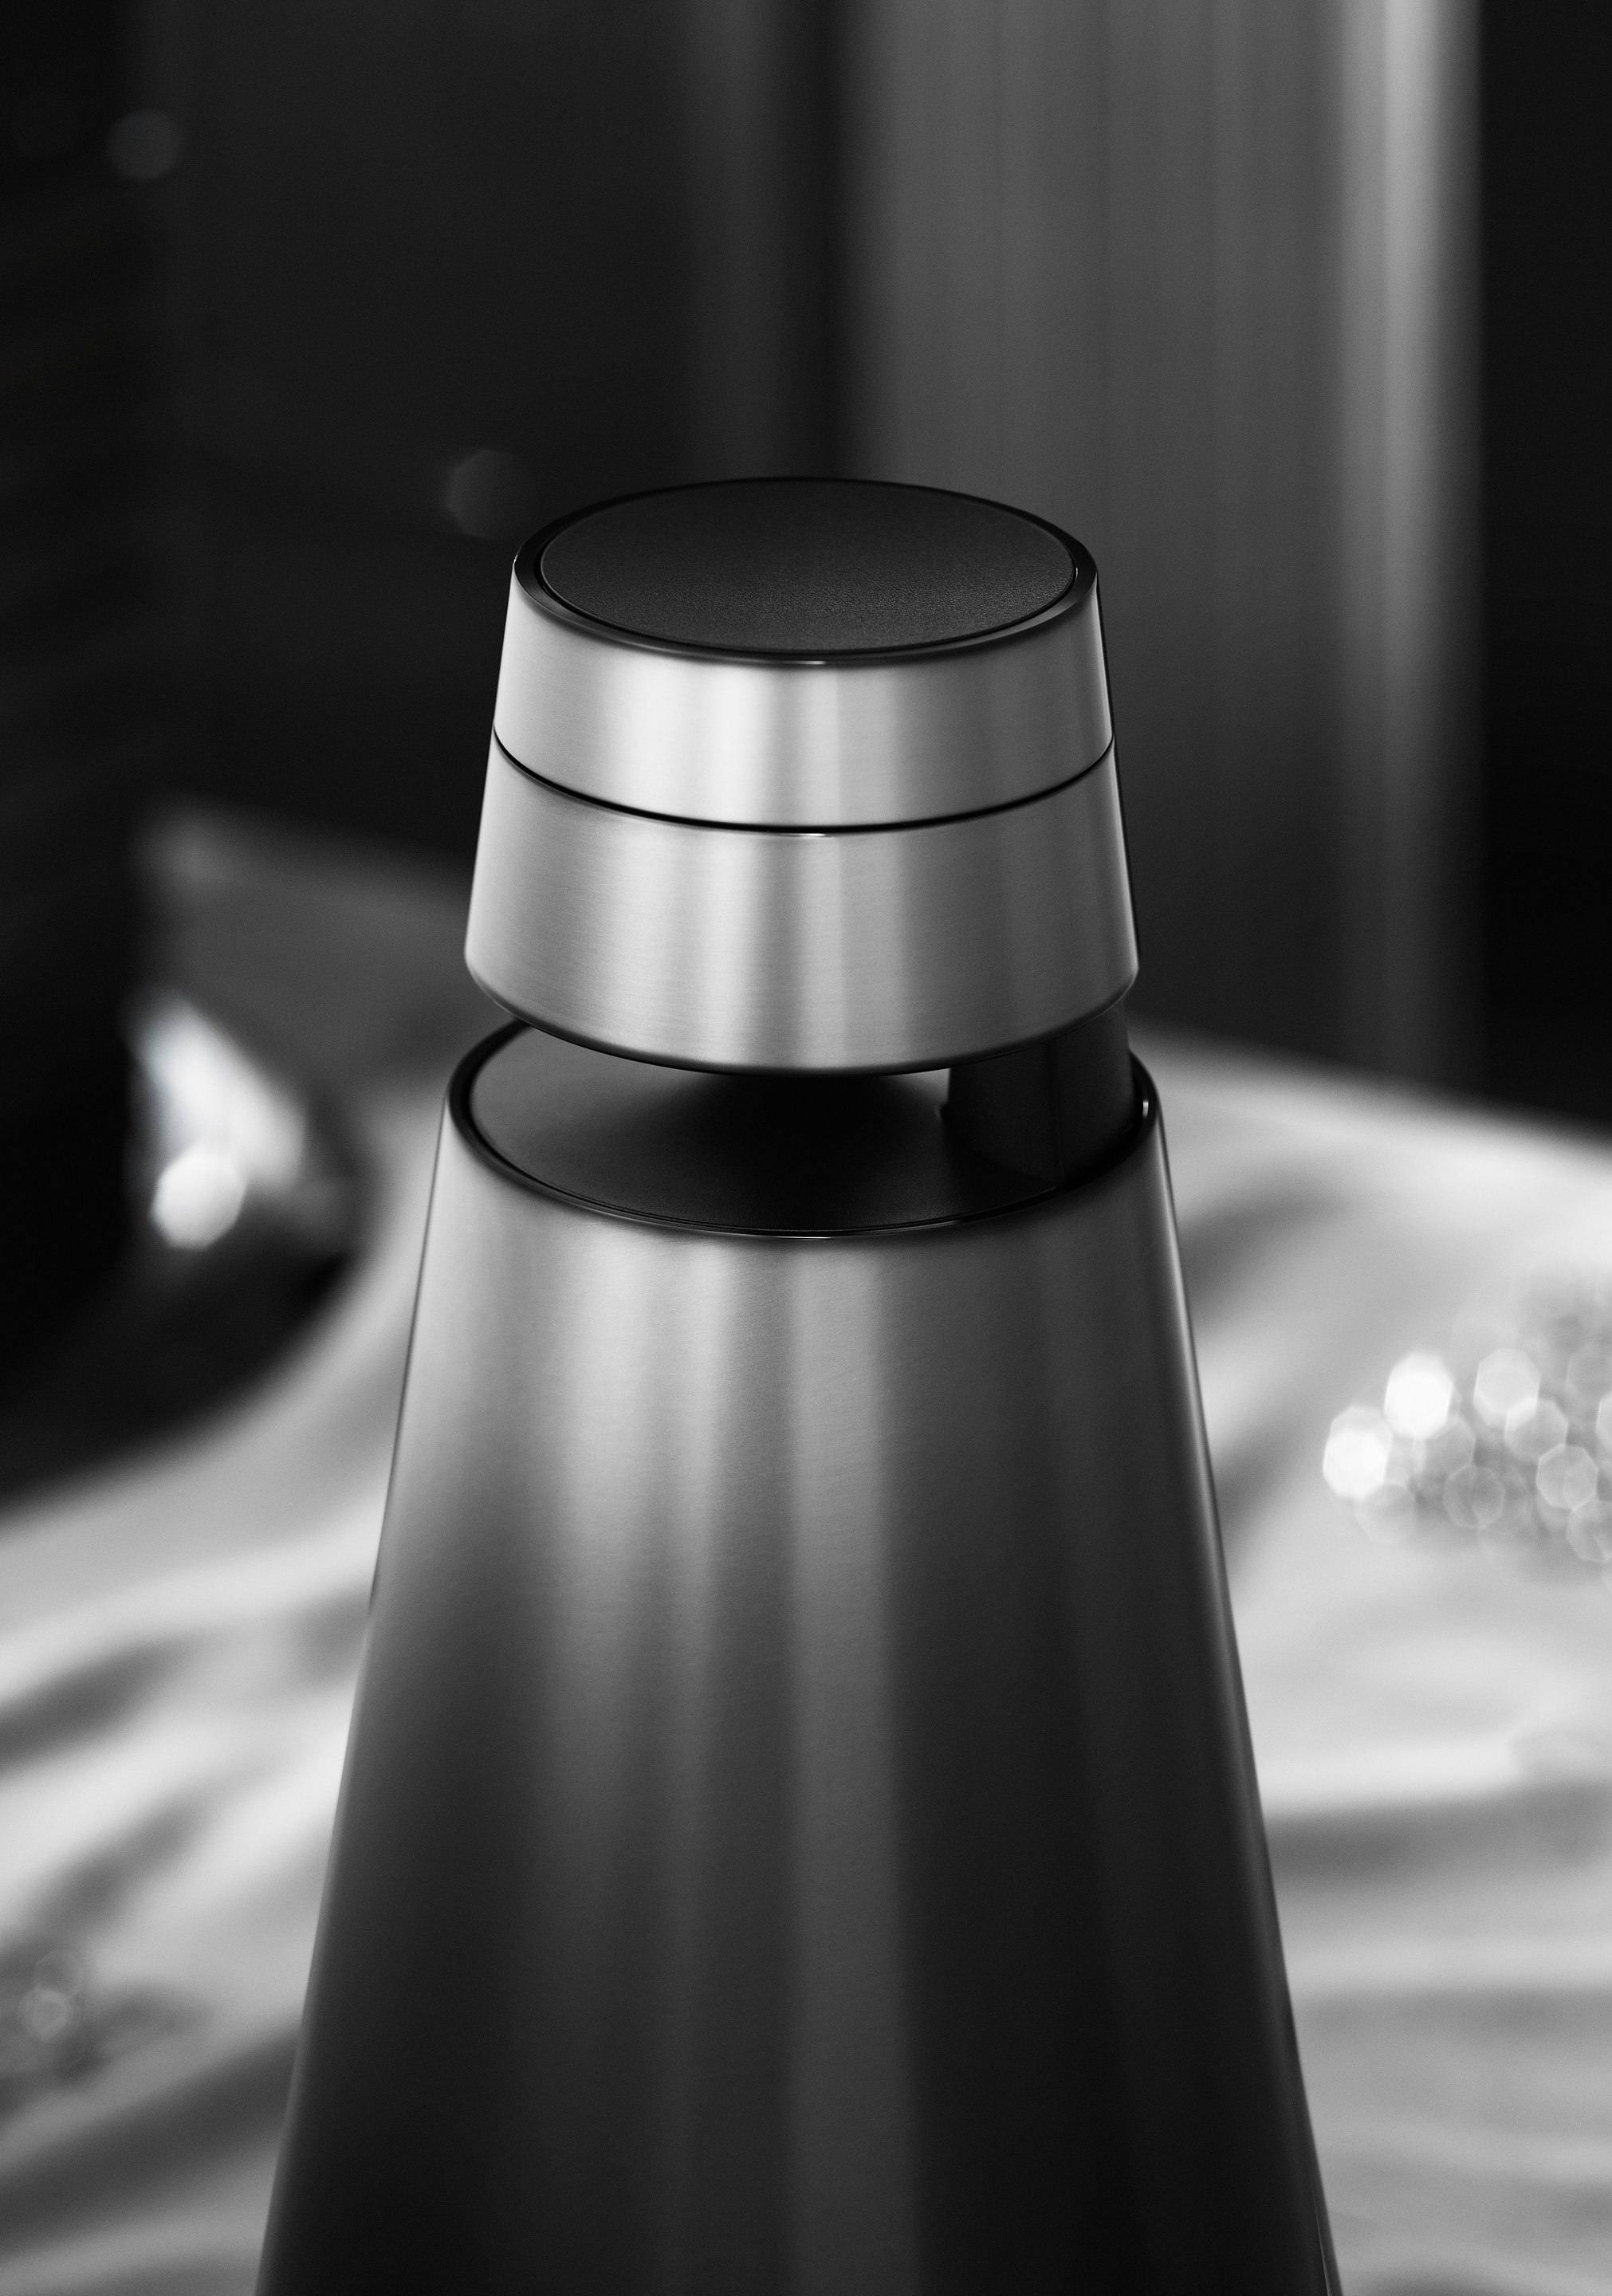  Beosound 1 New York Edition" class = "aimg laimg fimg lazyload "/> </source> </picture> </figure>
<figure class=